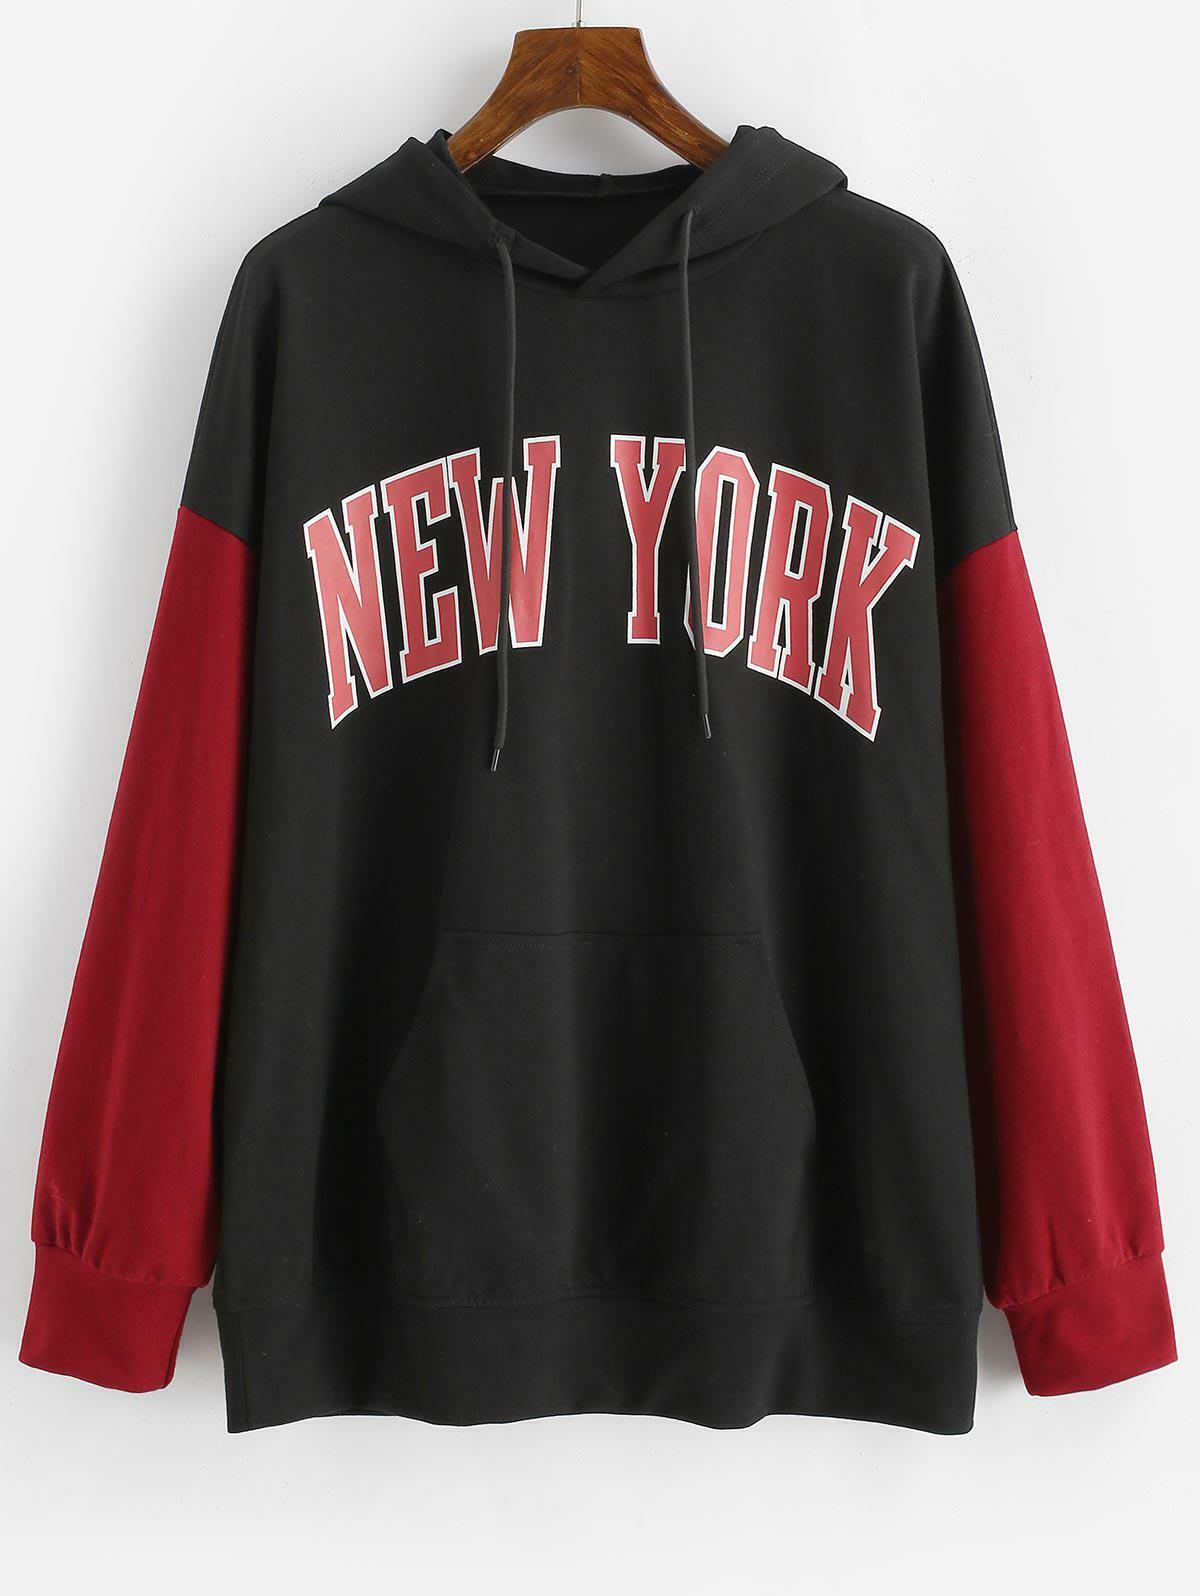 Zaful Front Pocket Graphic Colorblock Hoodie Black/Red New York Size Small  US 4